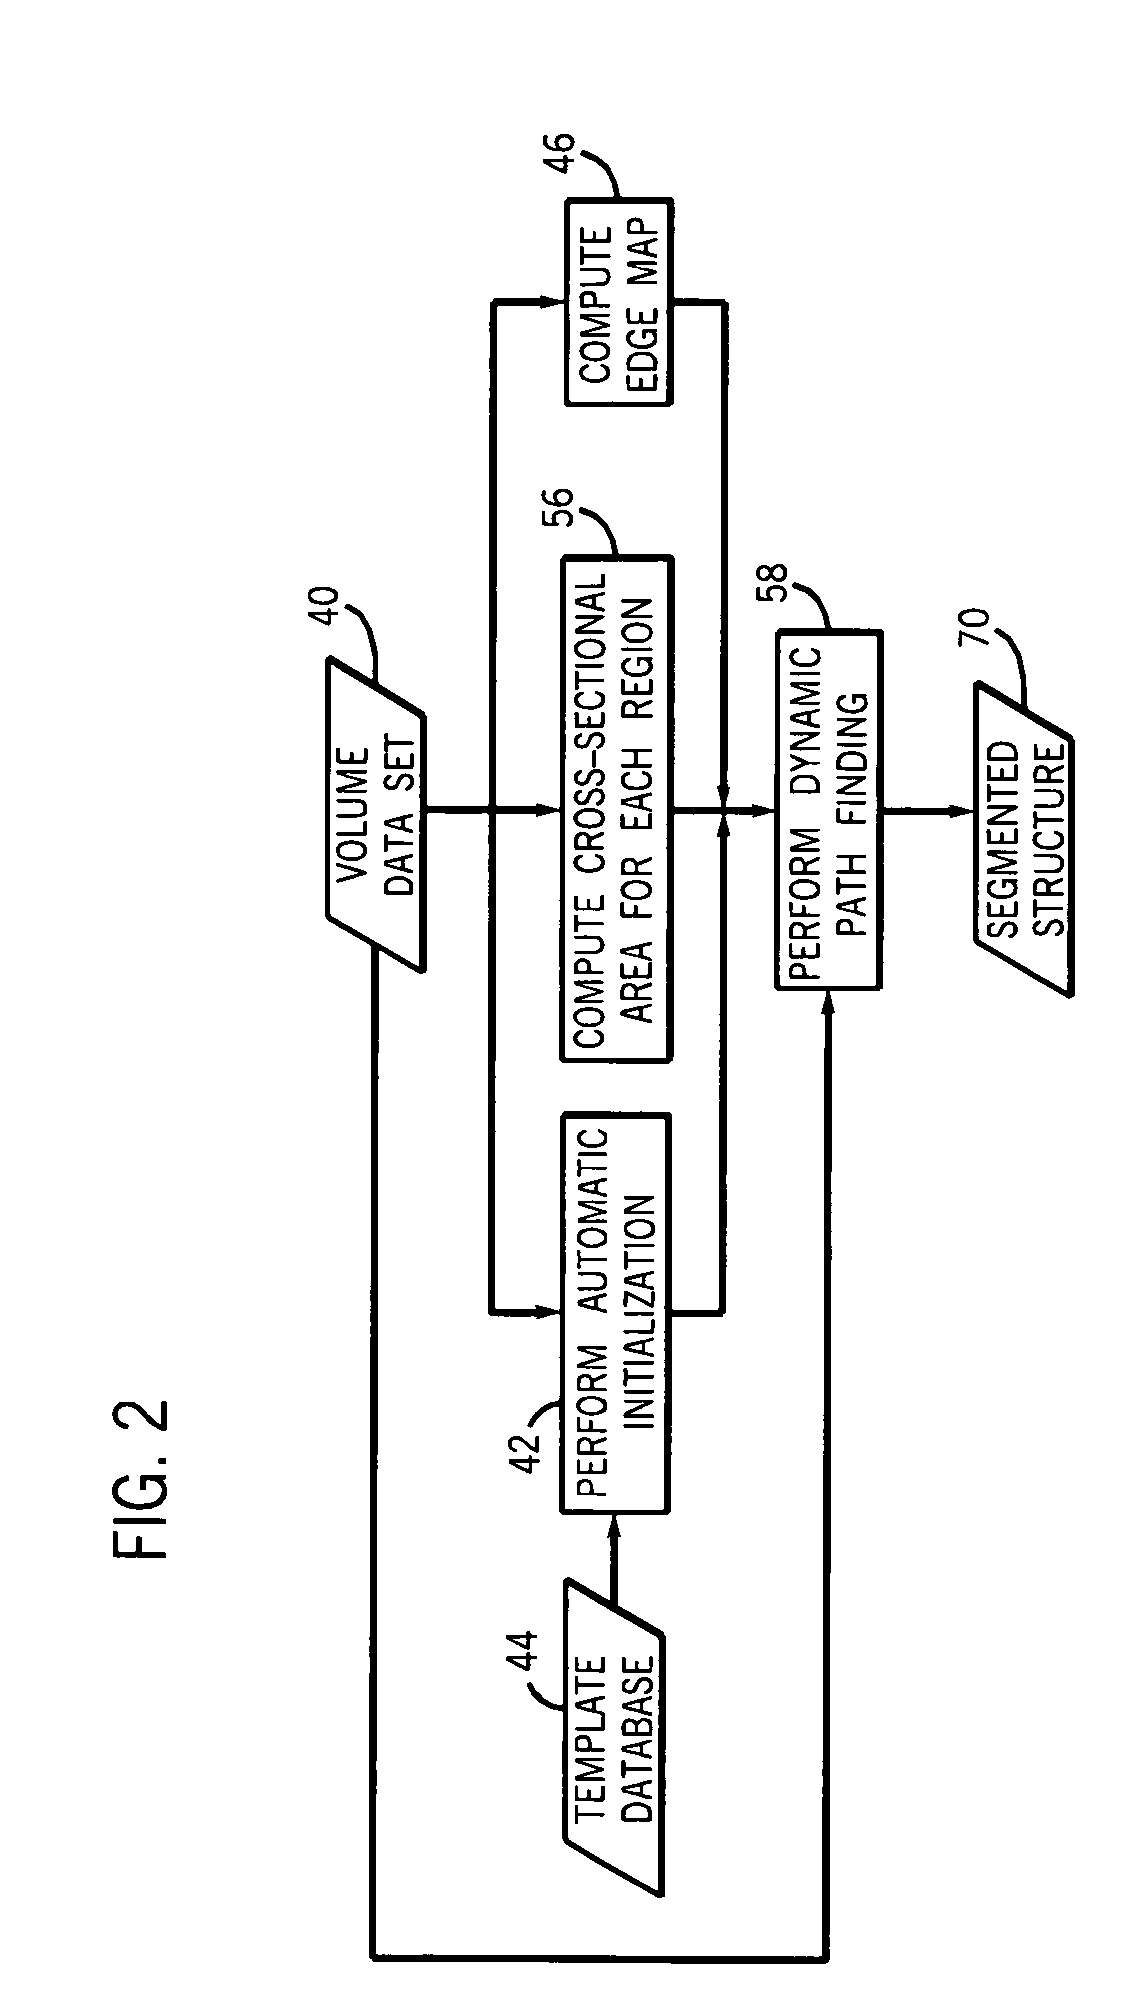 Method and apparatus for extracting multi-dimensional structures using dynamic constraints